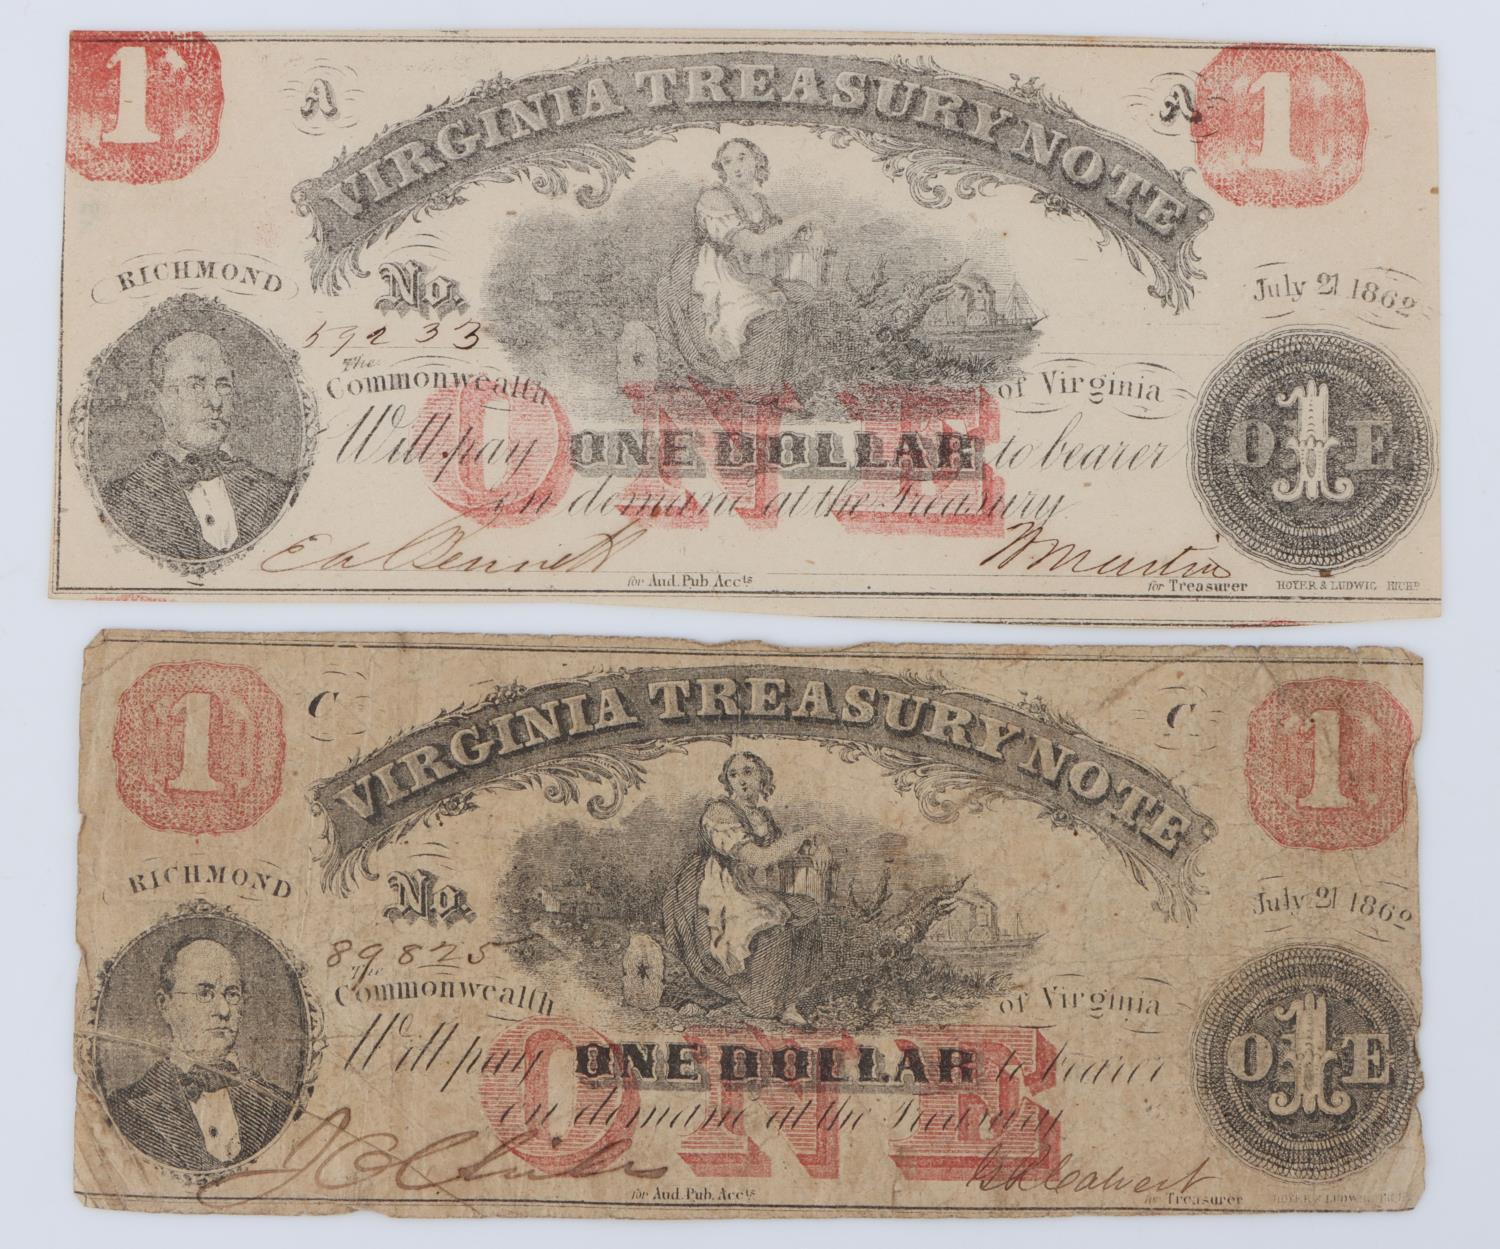 LOT OF 5 CONFEDERATE STATES OF AMERICA BANK NOTES